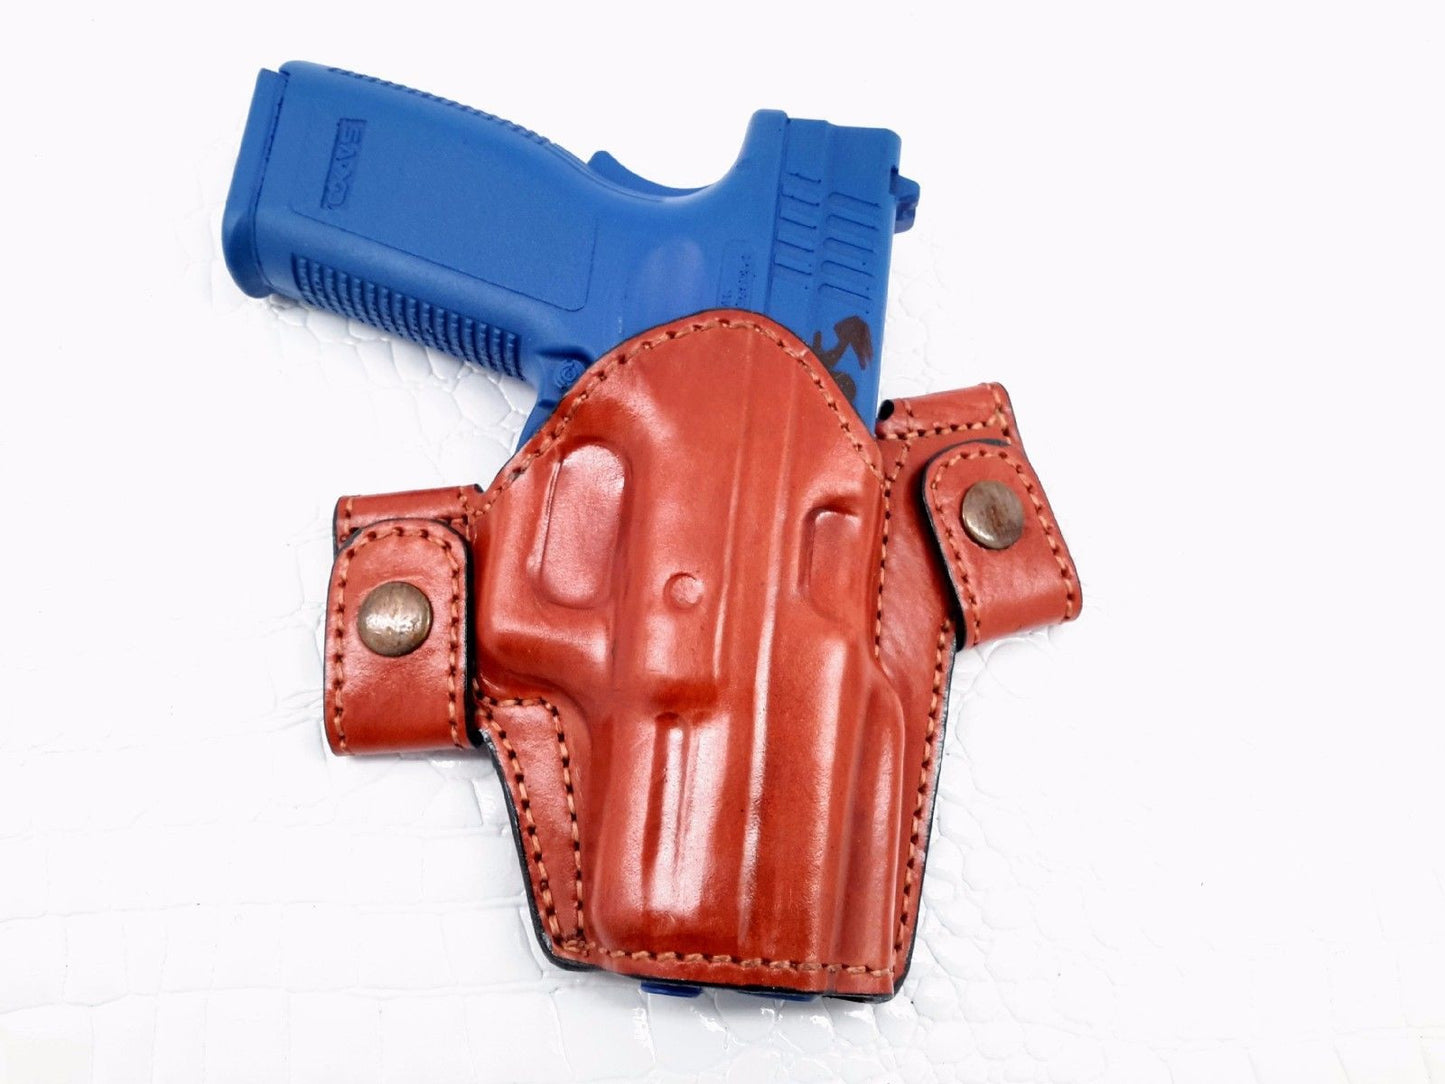 Snap-on Holster for Springfield  Armory  XD-45, 4", MyHolster